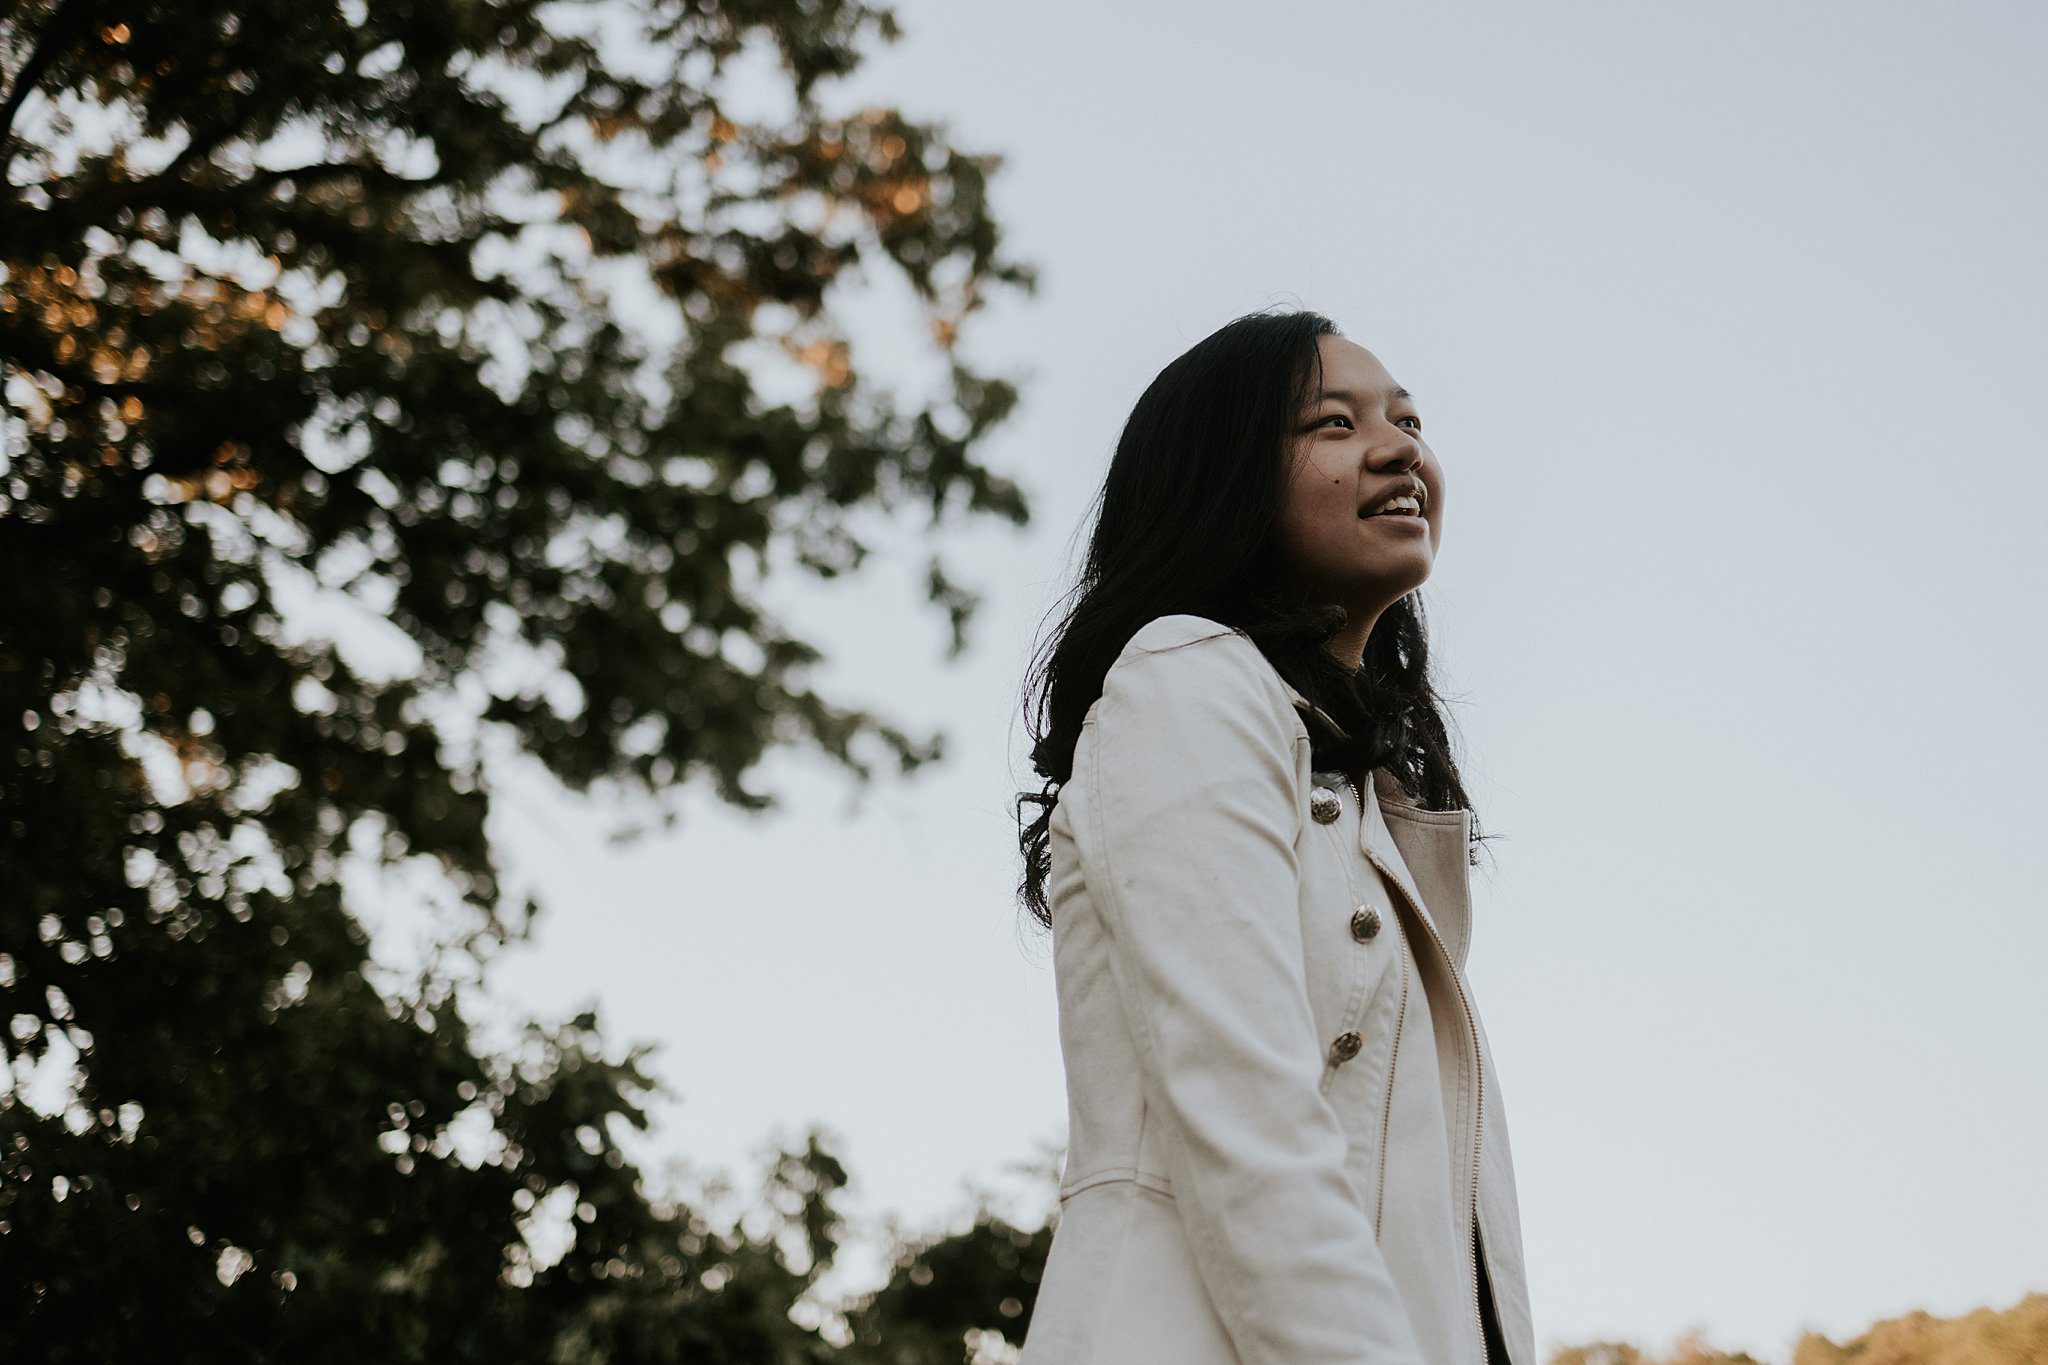 This is a photo of a girl with black hair and a white jacket taken from the ground looking up to the sky. She is smiling and looking off in the distance with a tree on the back left. 